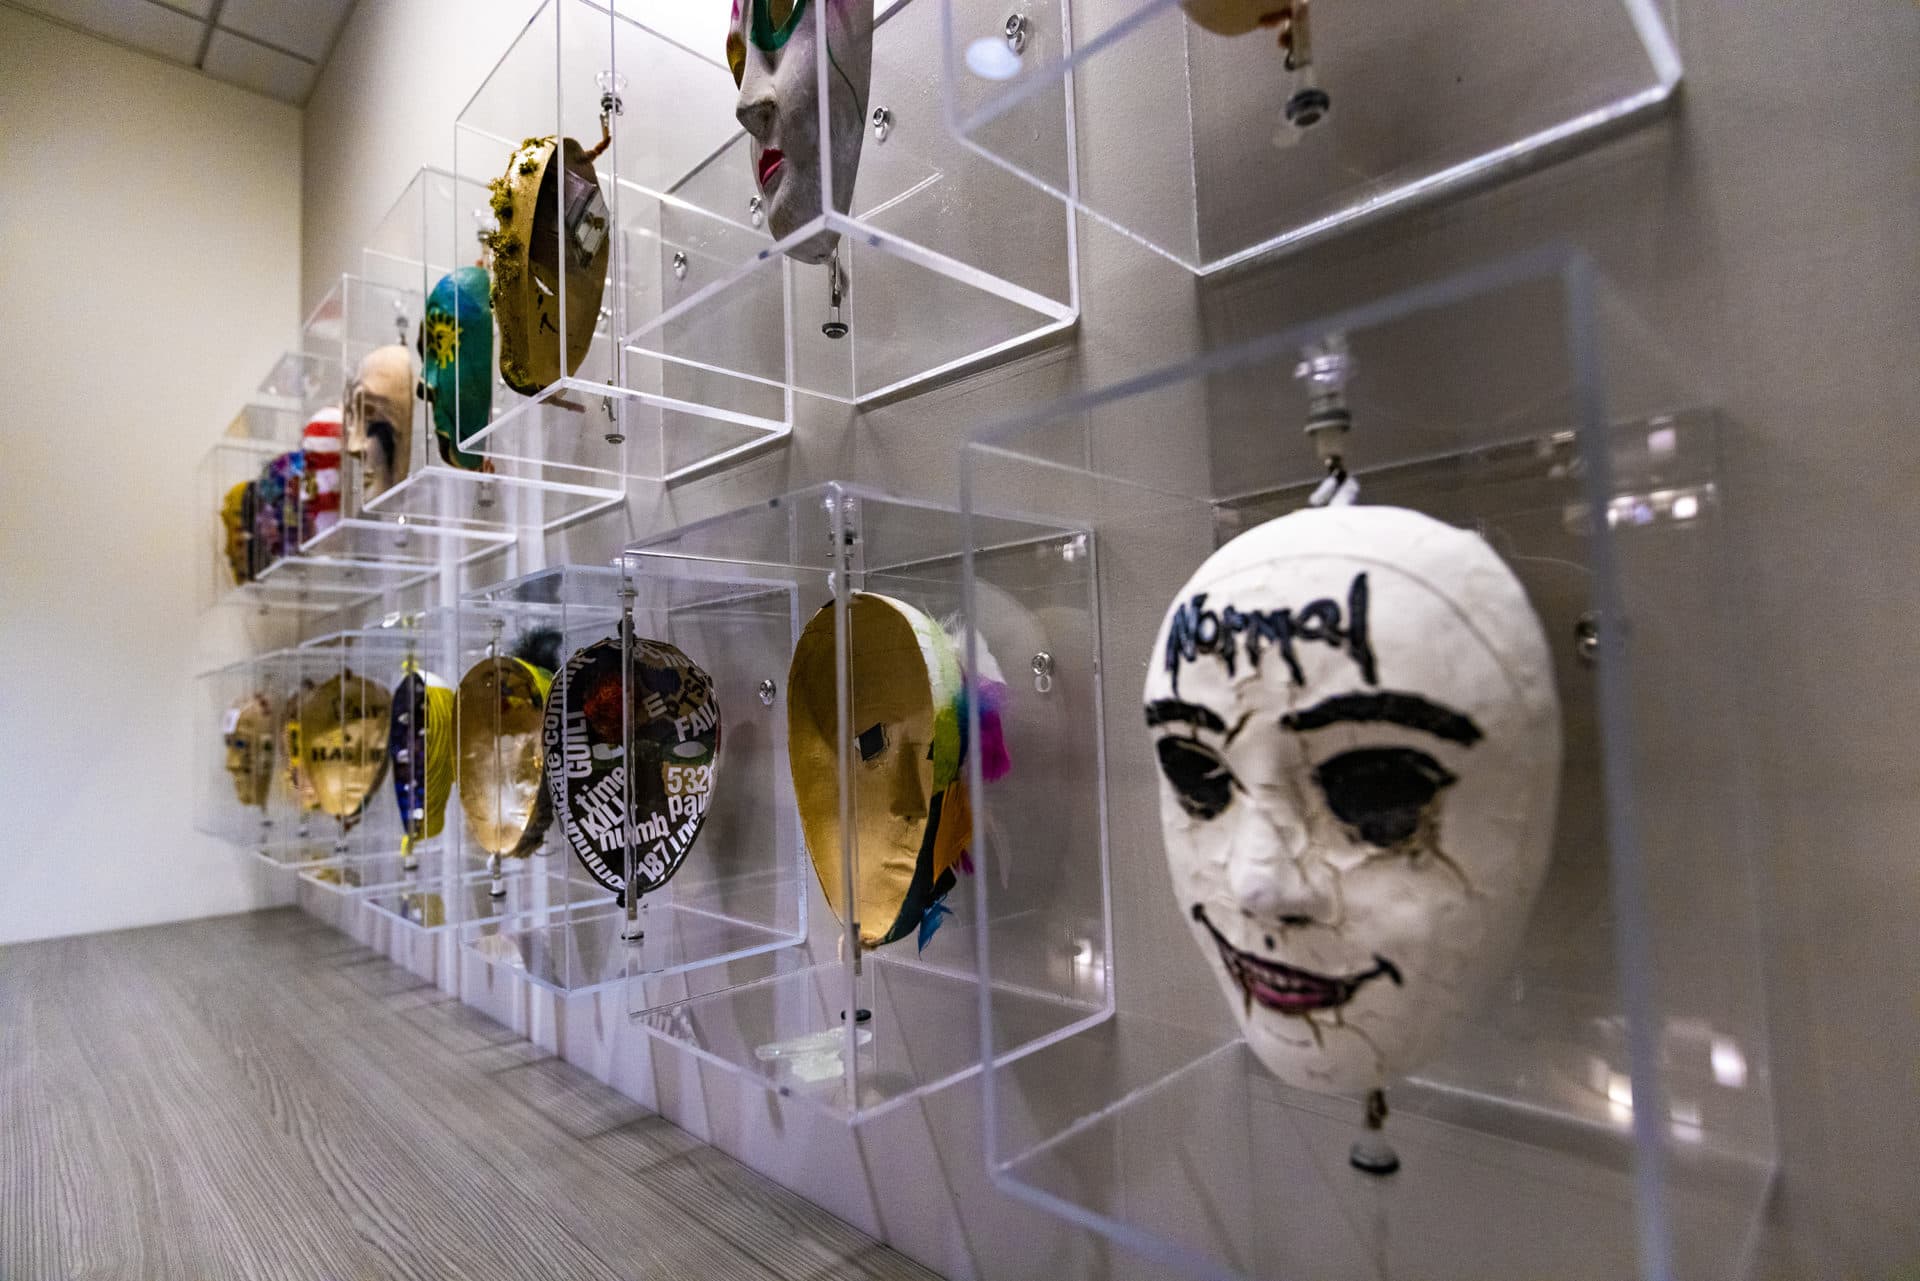 Home Base has an art therapy program in which veterans paint masks. The outside of the mask represents how they project themselves to the world; the inside represents what they're really feeling. (Jesse Costa/WBUR)